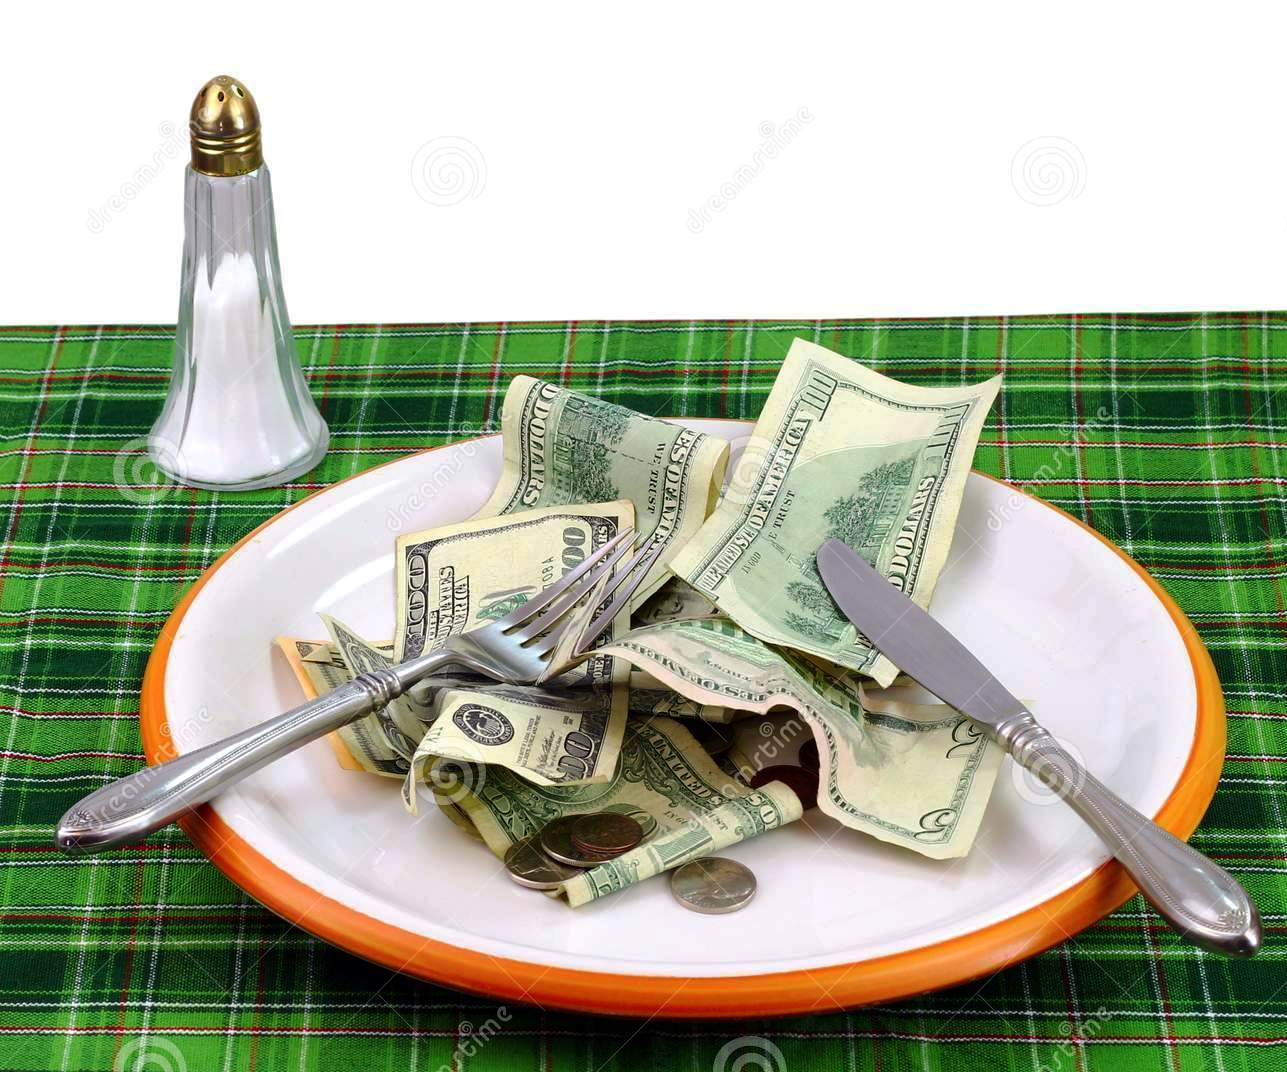 January 15th, 2022 – Out With Joe, the Rising Cost of Food.. at Home Dinning Vs Eating Out